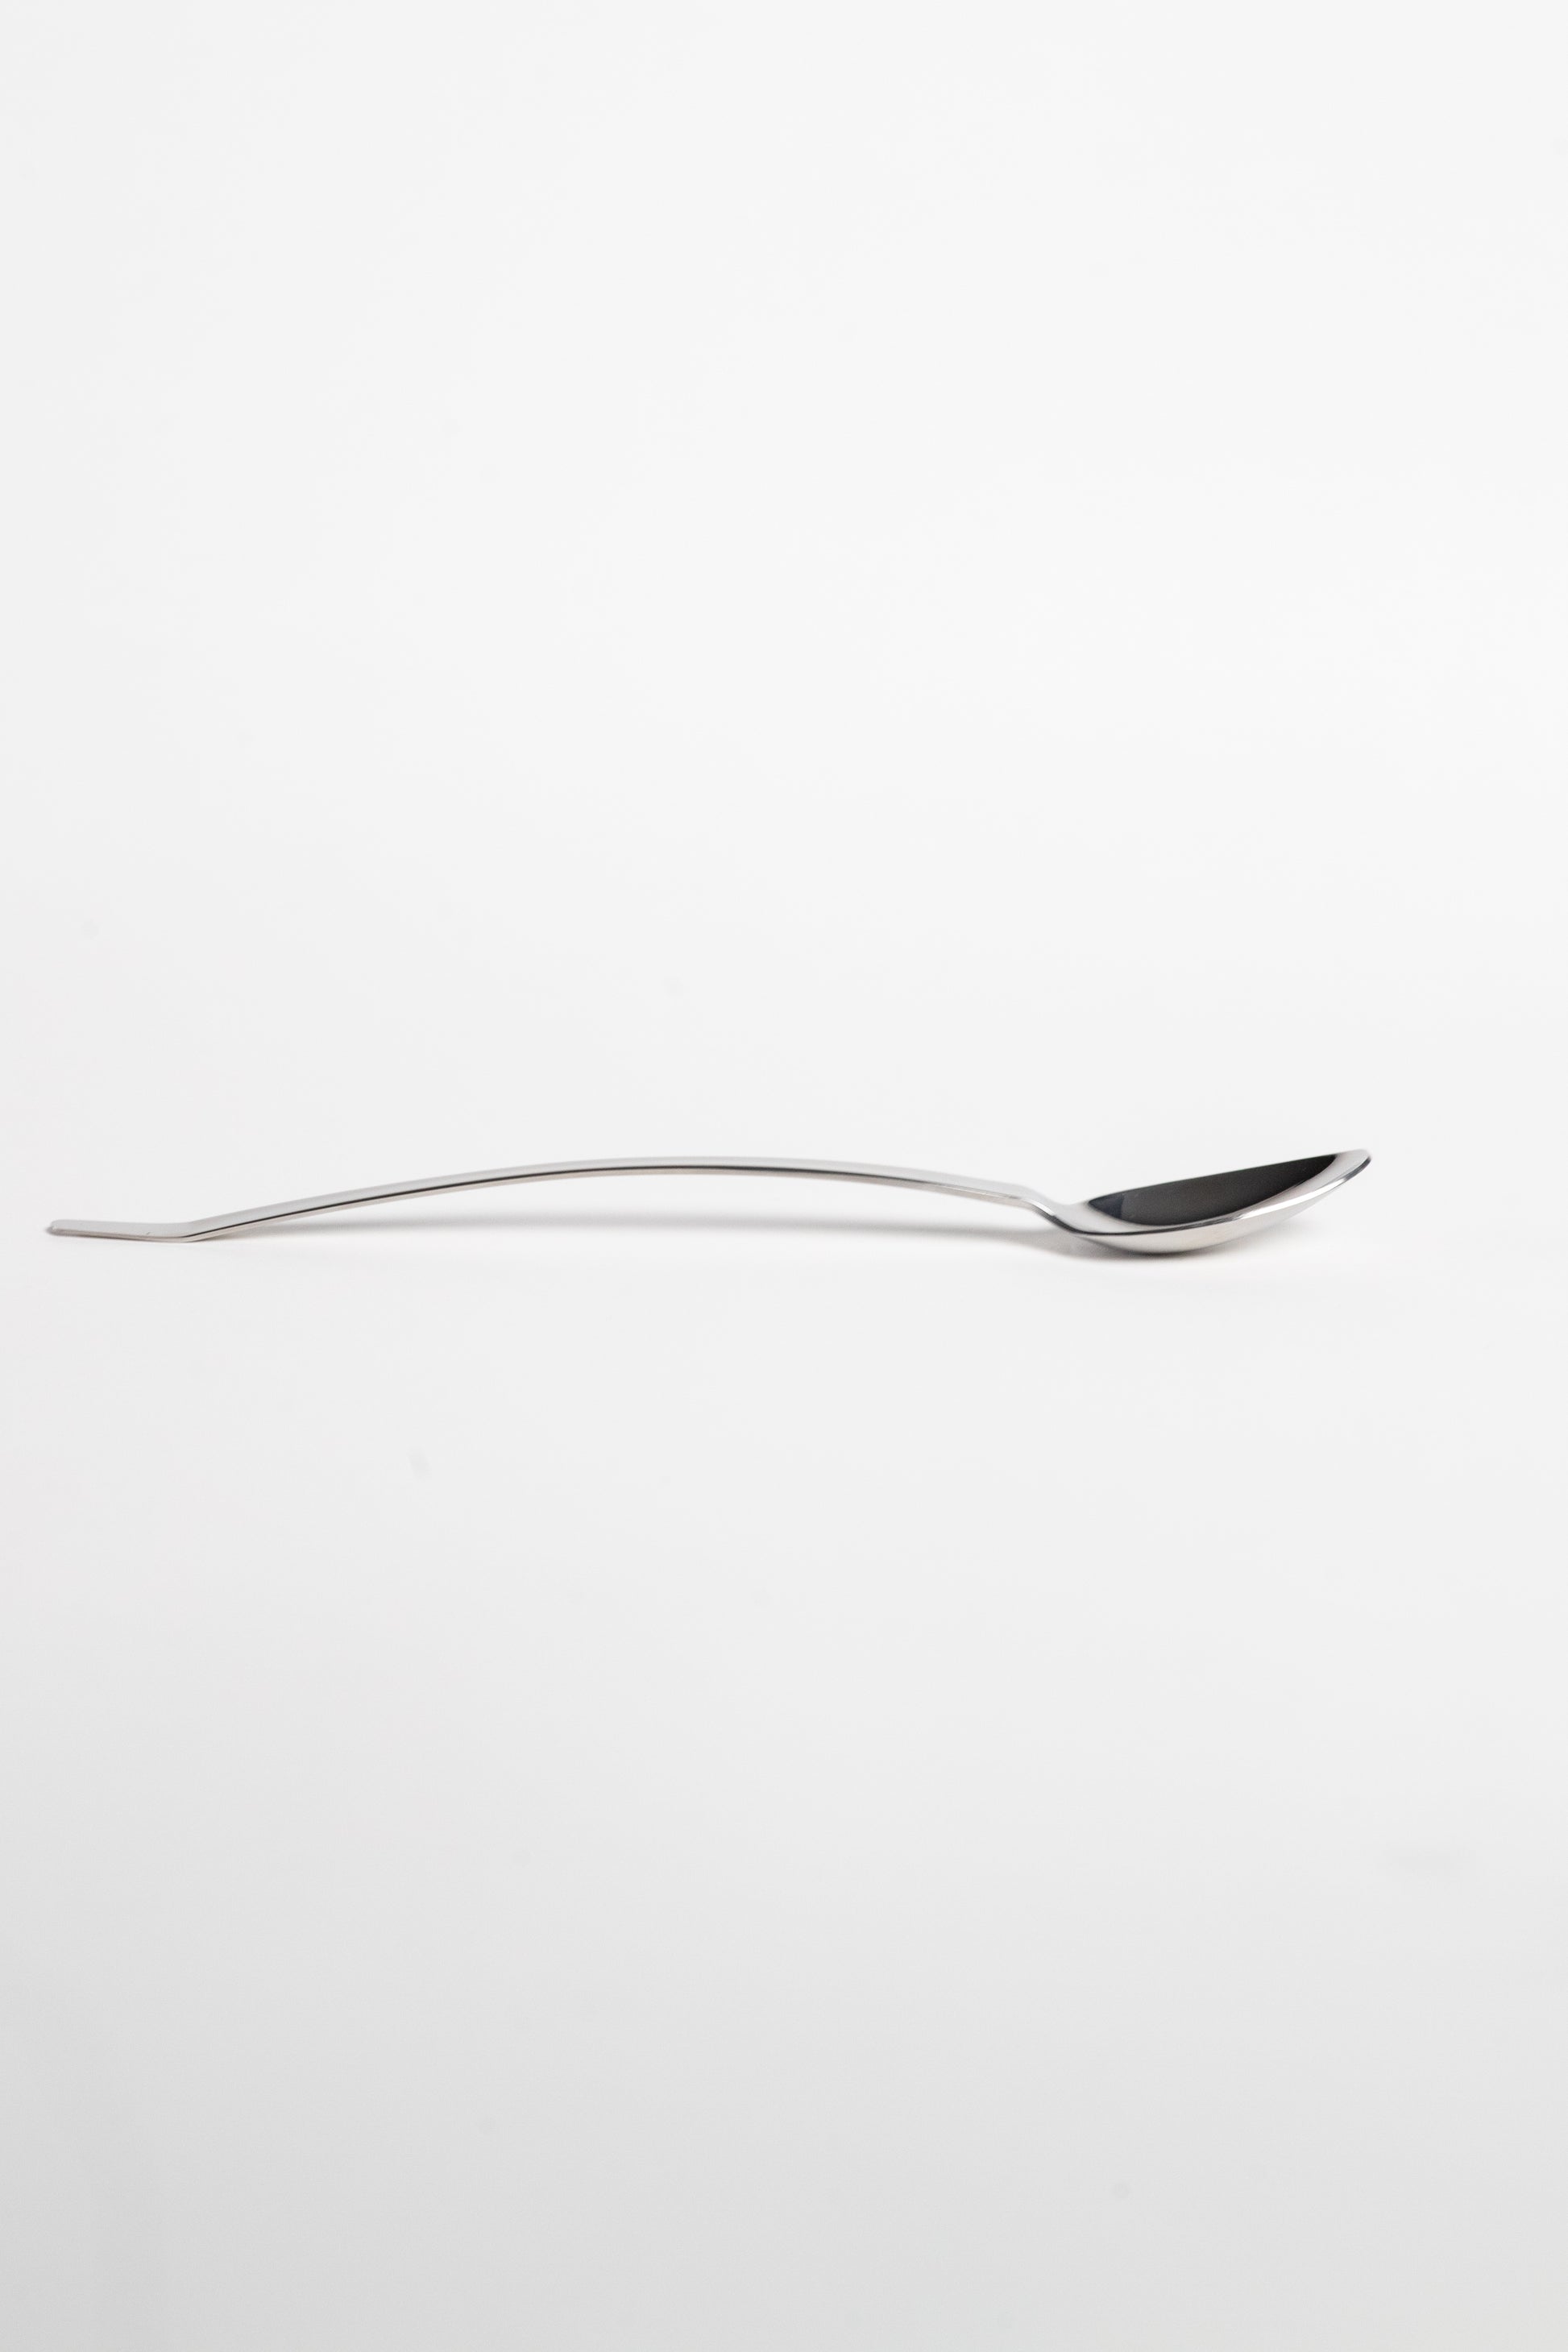 Quenelle Spoon – Modernist Cutlery